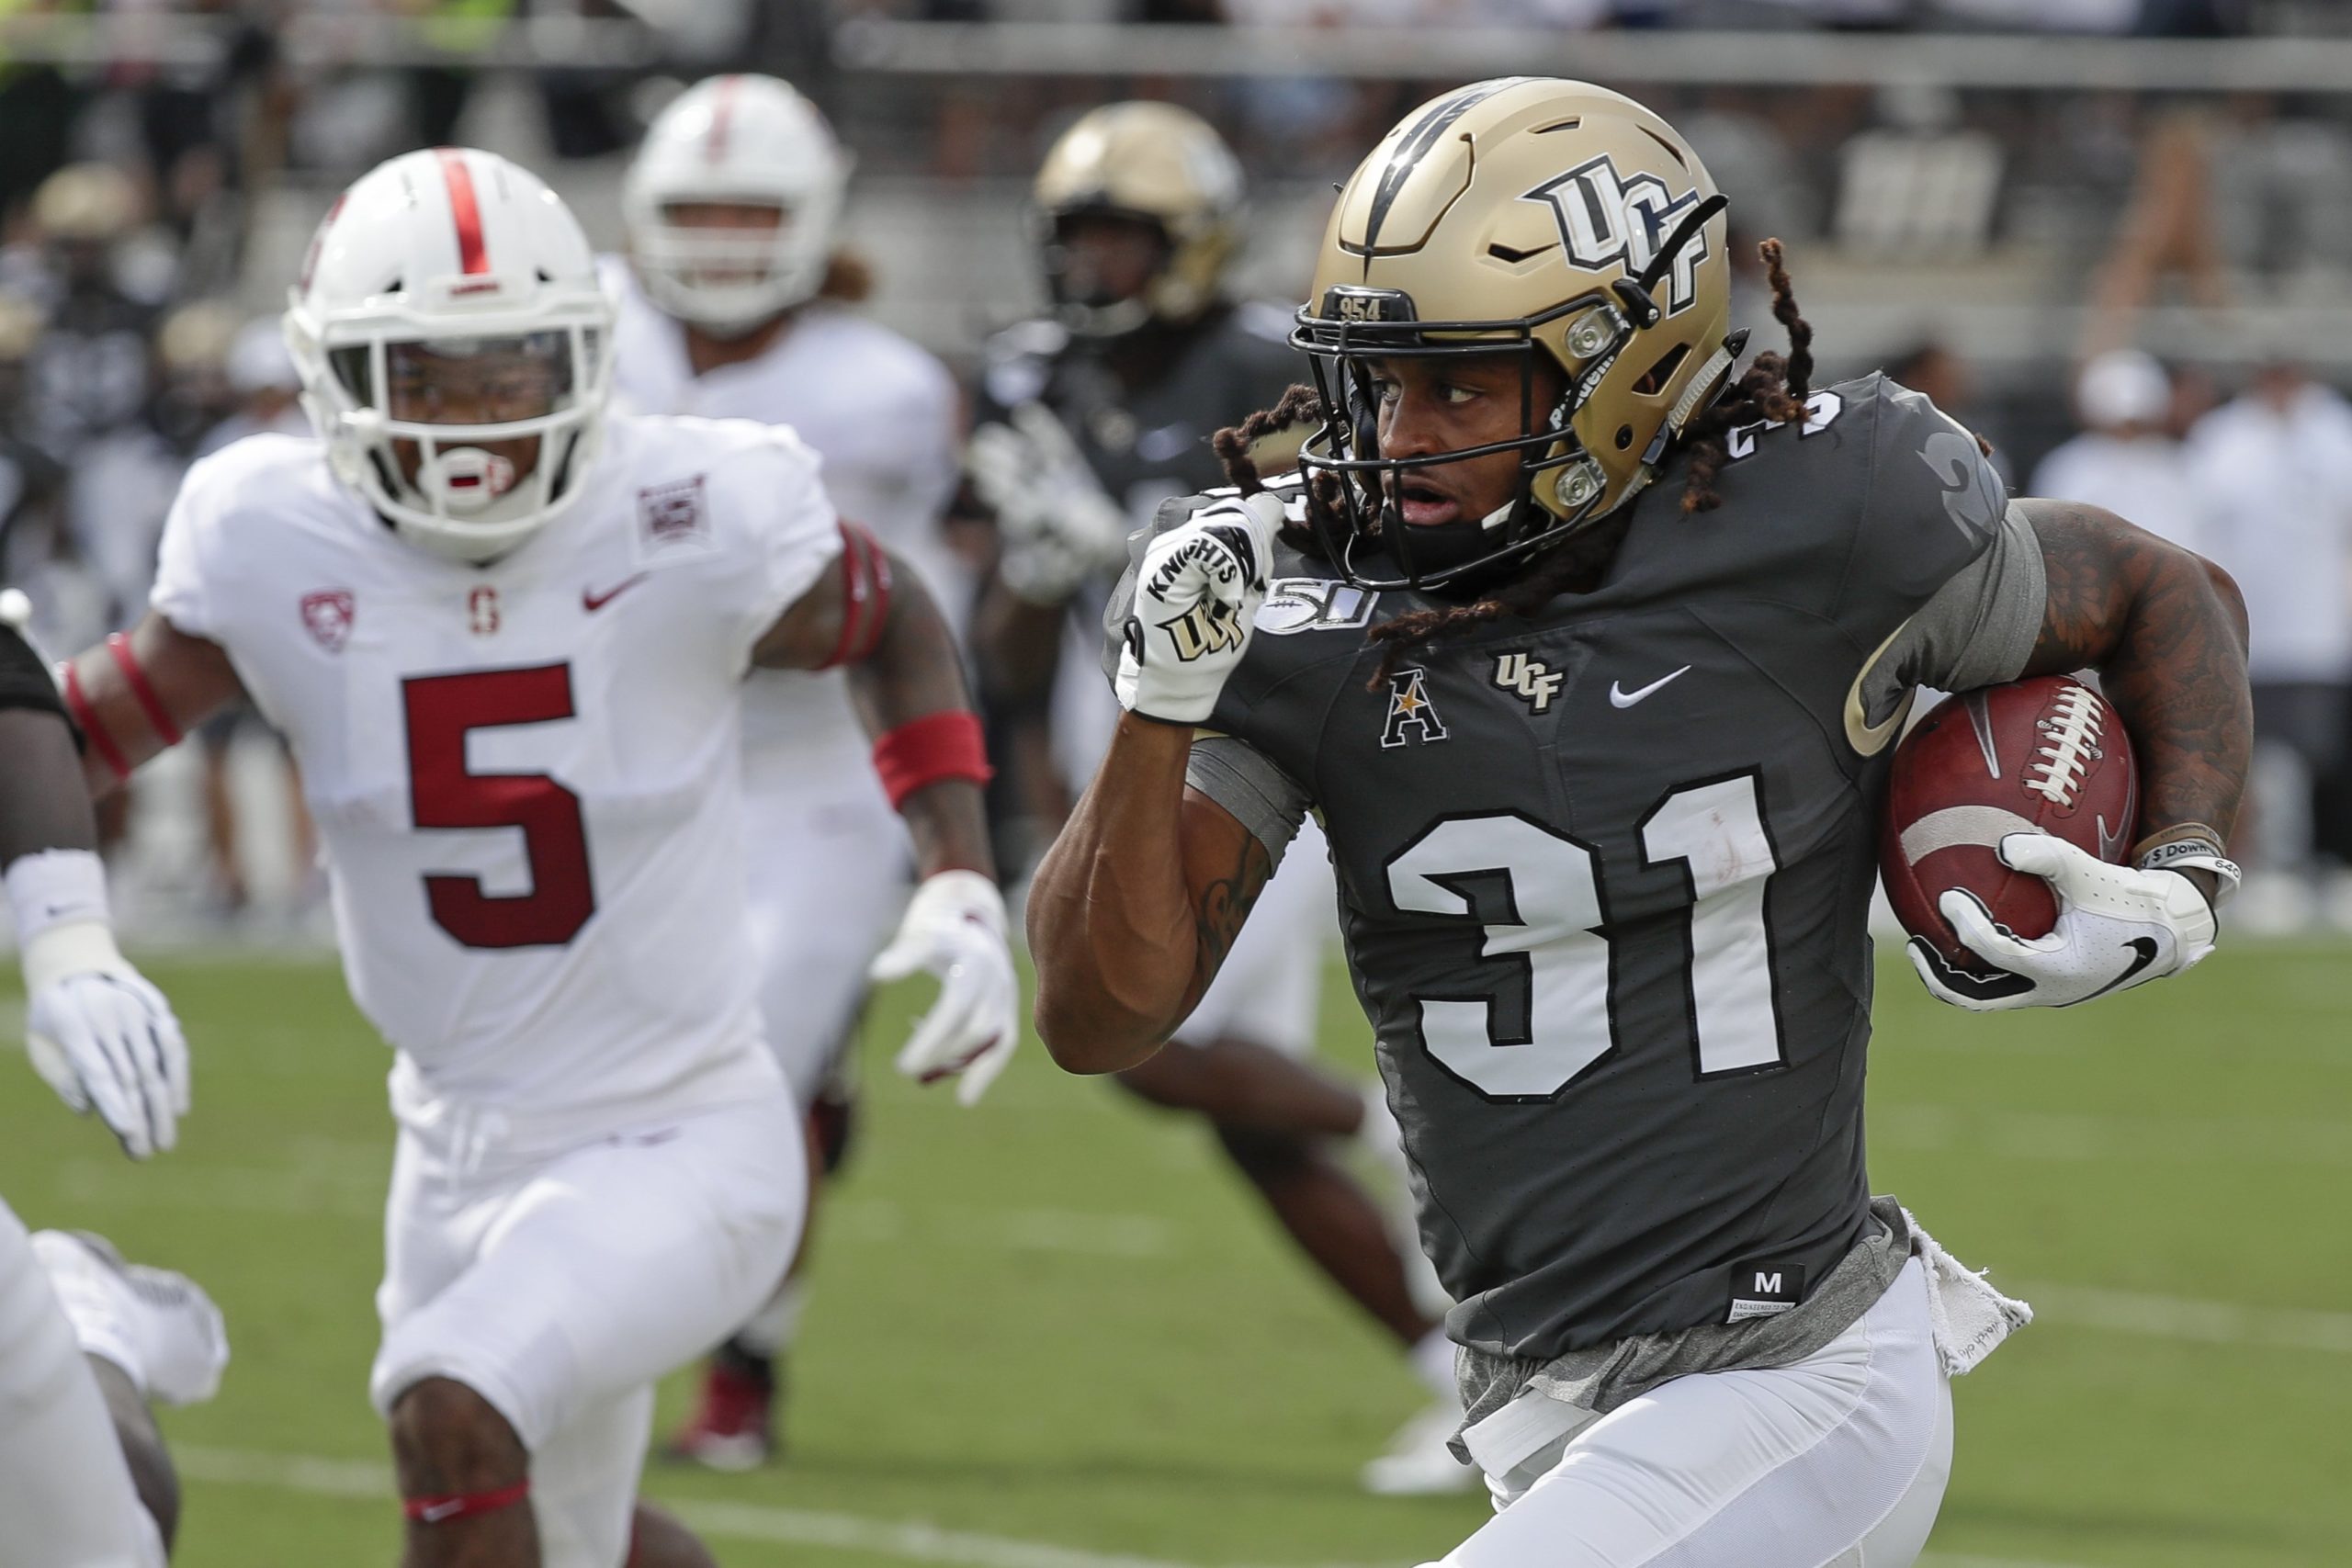 UCF Knights have a special player in versatile cornerback Aaron Robinson